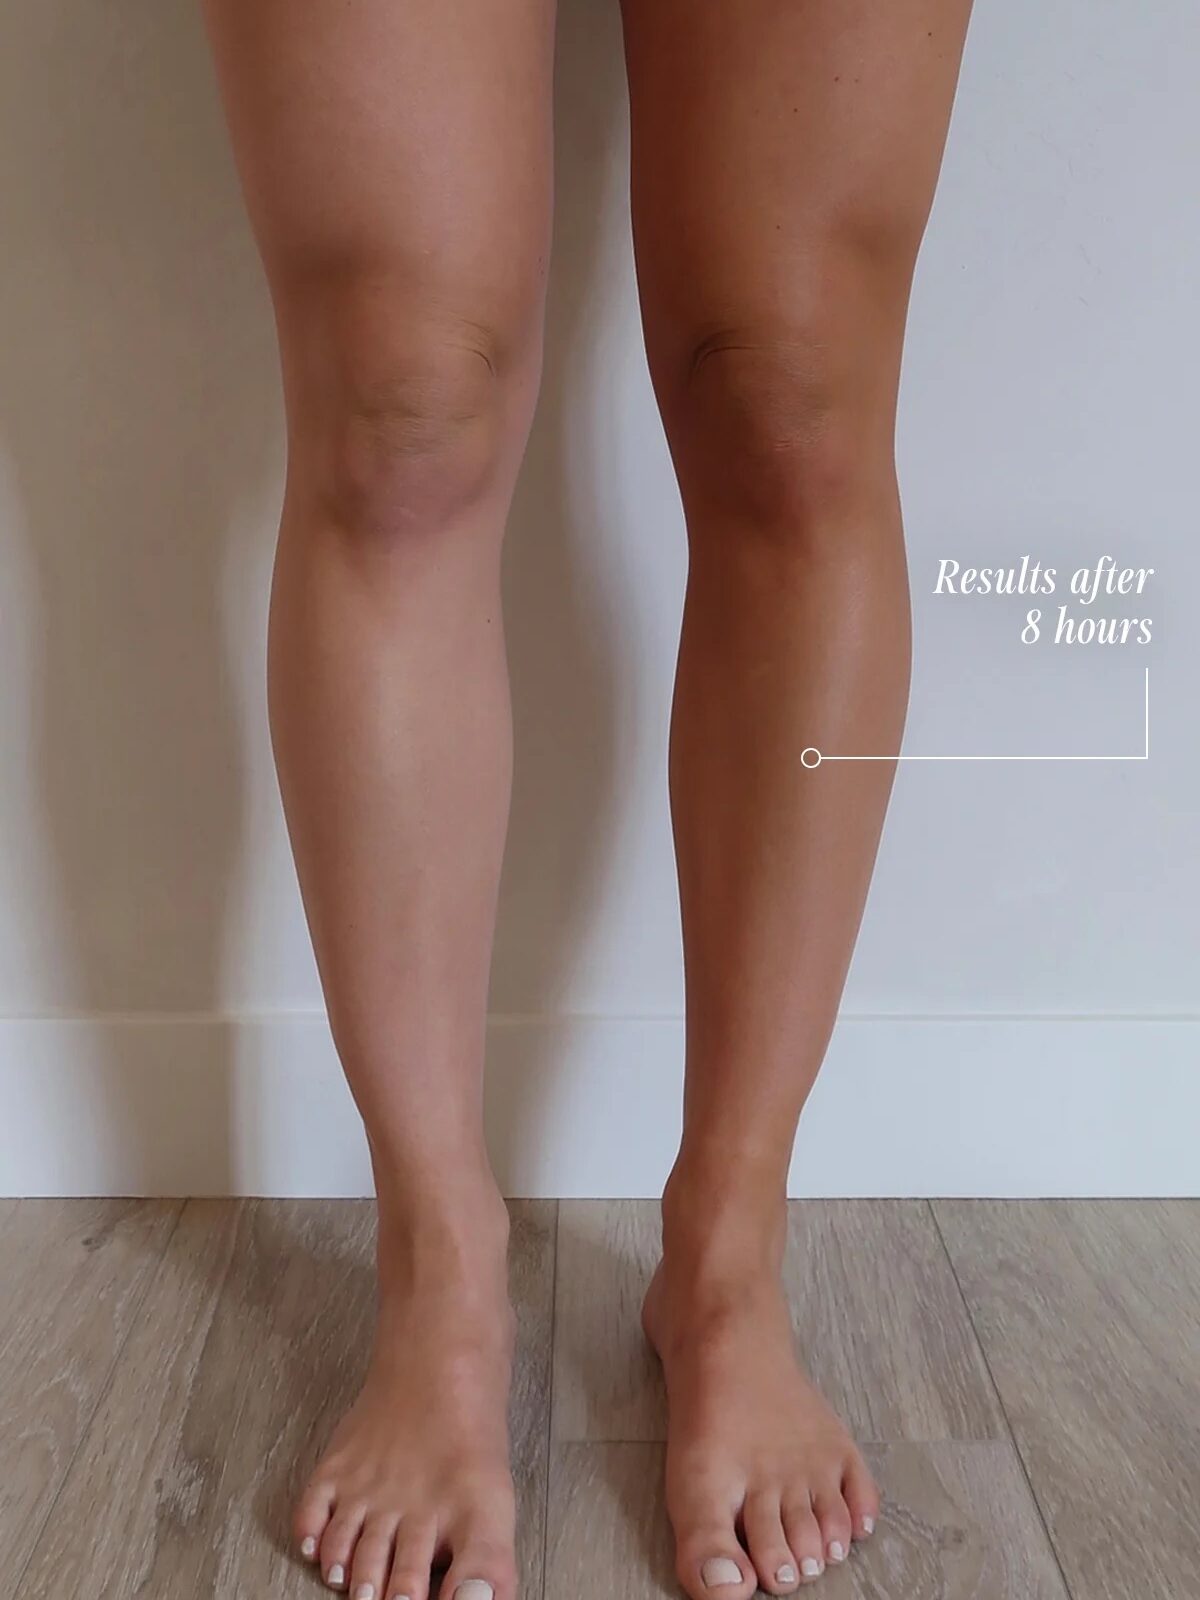 A pair of bare legs showing a comparison of skin tone between the left and right leg, with text stating "Results after 8 hours" pointing to the right leg. The image is on a wooden floor background.